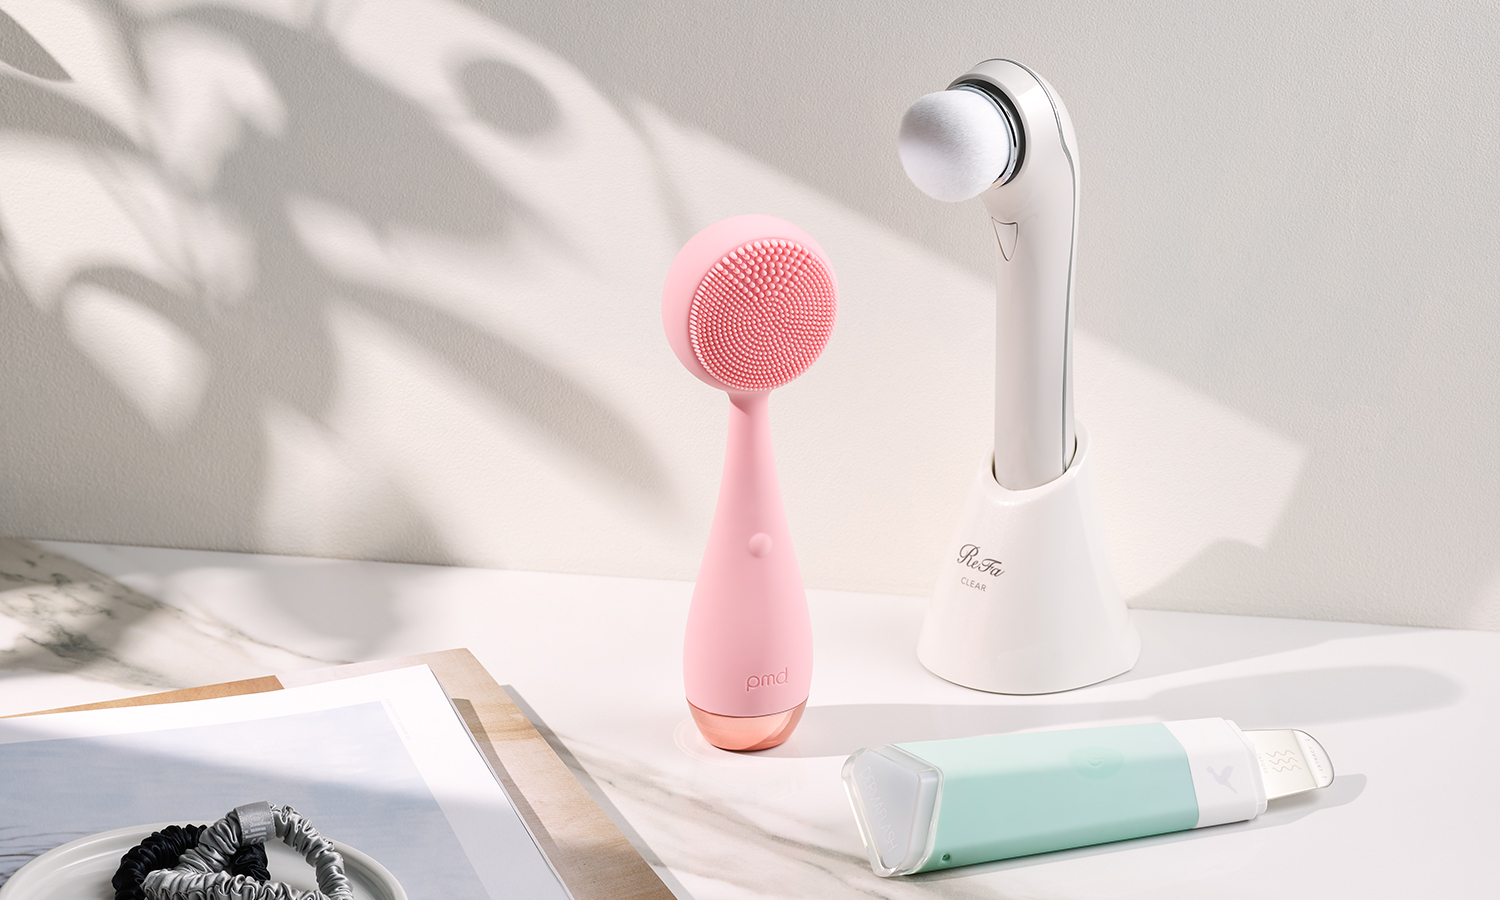 Best Facial Cleansing Brushes and Devices